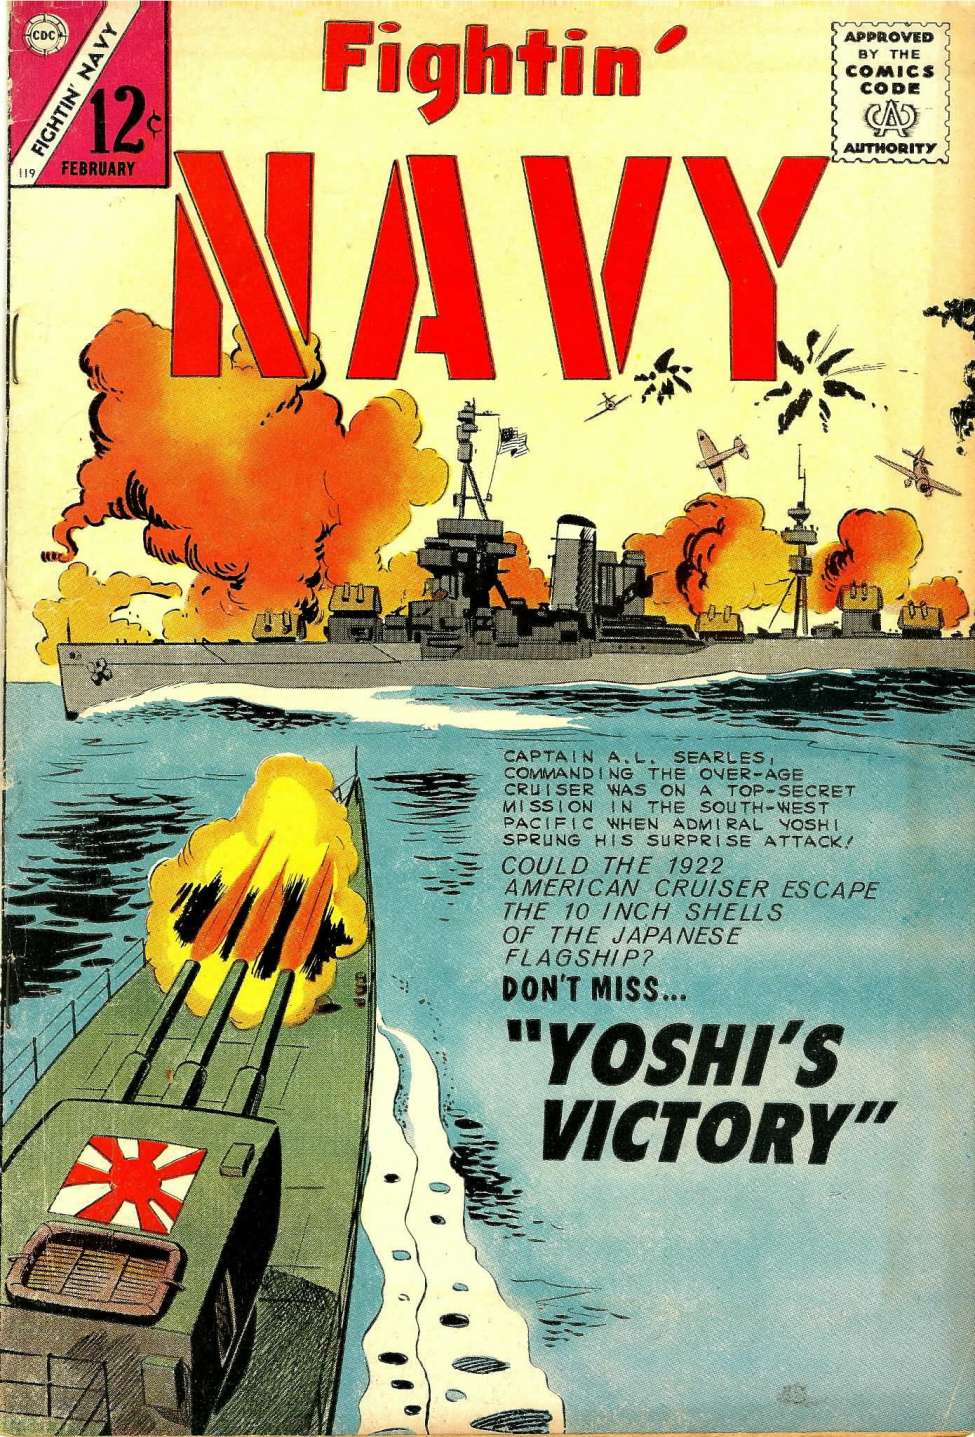 Book Cover For Fightin' Navy 119